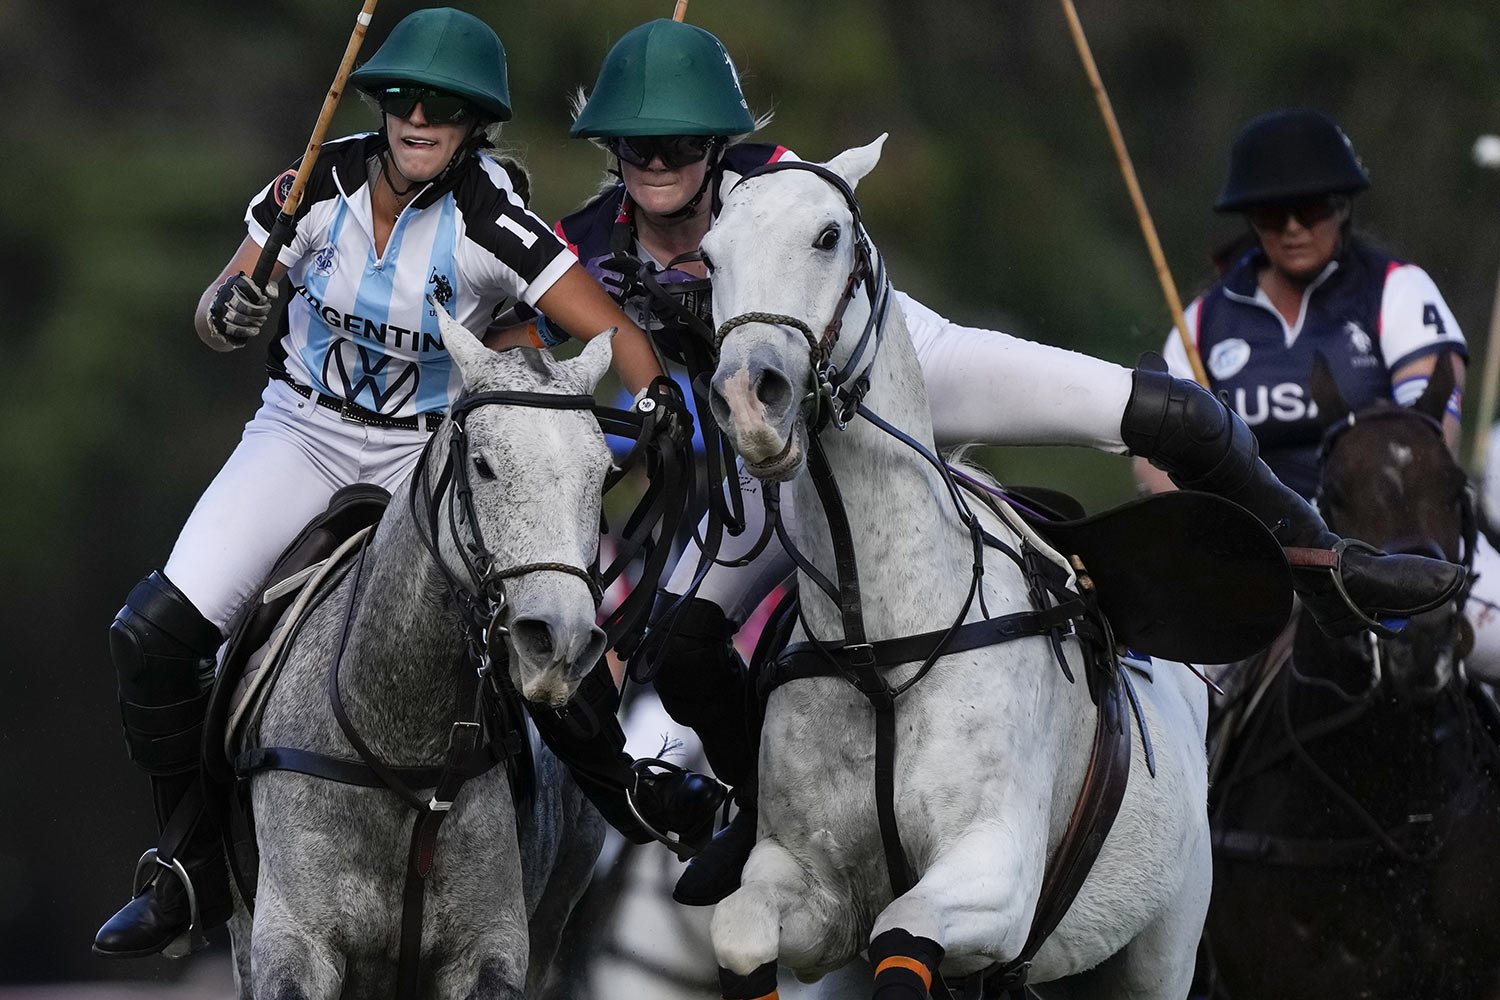  Argentina's Agustina Imaz, left, and Lilian Lequeira from the U.S., compete in the Women's Polo World Championship final match in Buenos Aires, Argentina, April 16, 2022. Argentina won 6-2. (AP Photo/Natacha Pisarenko) 